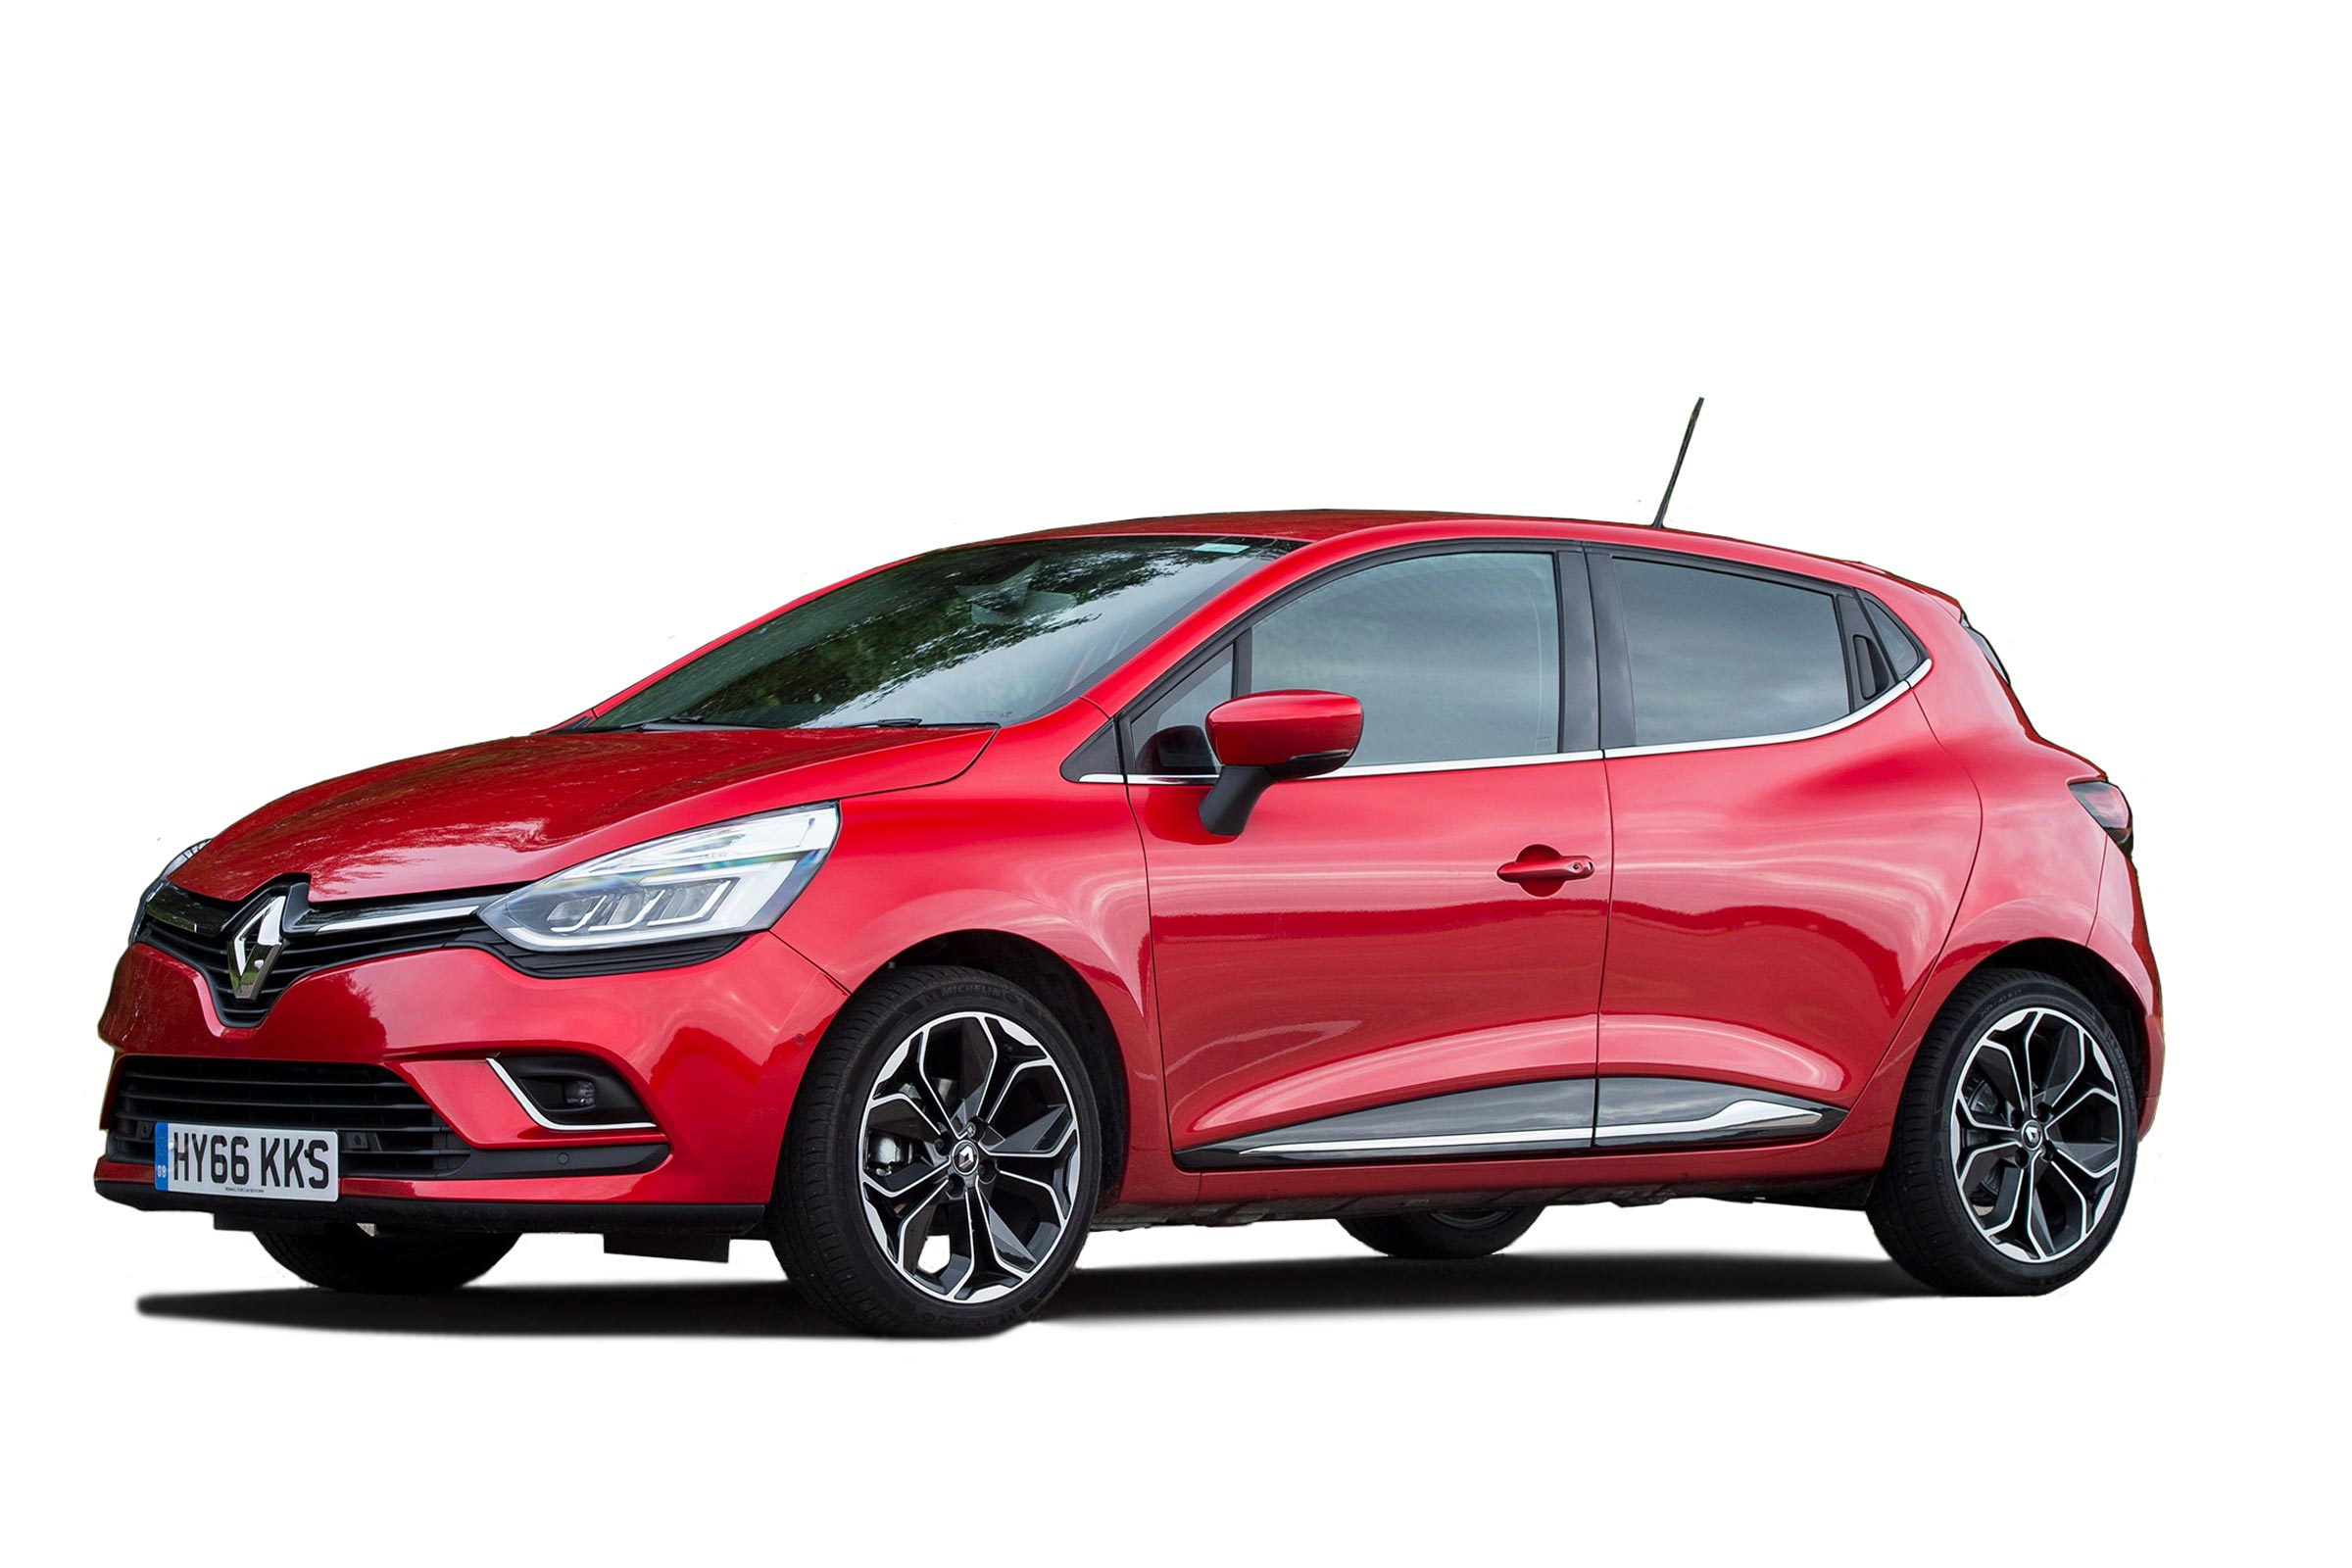 Road Test Review: Renault Clio Iconic